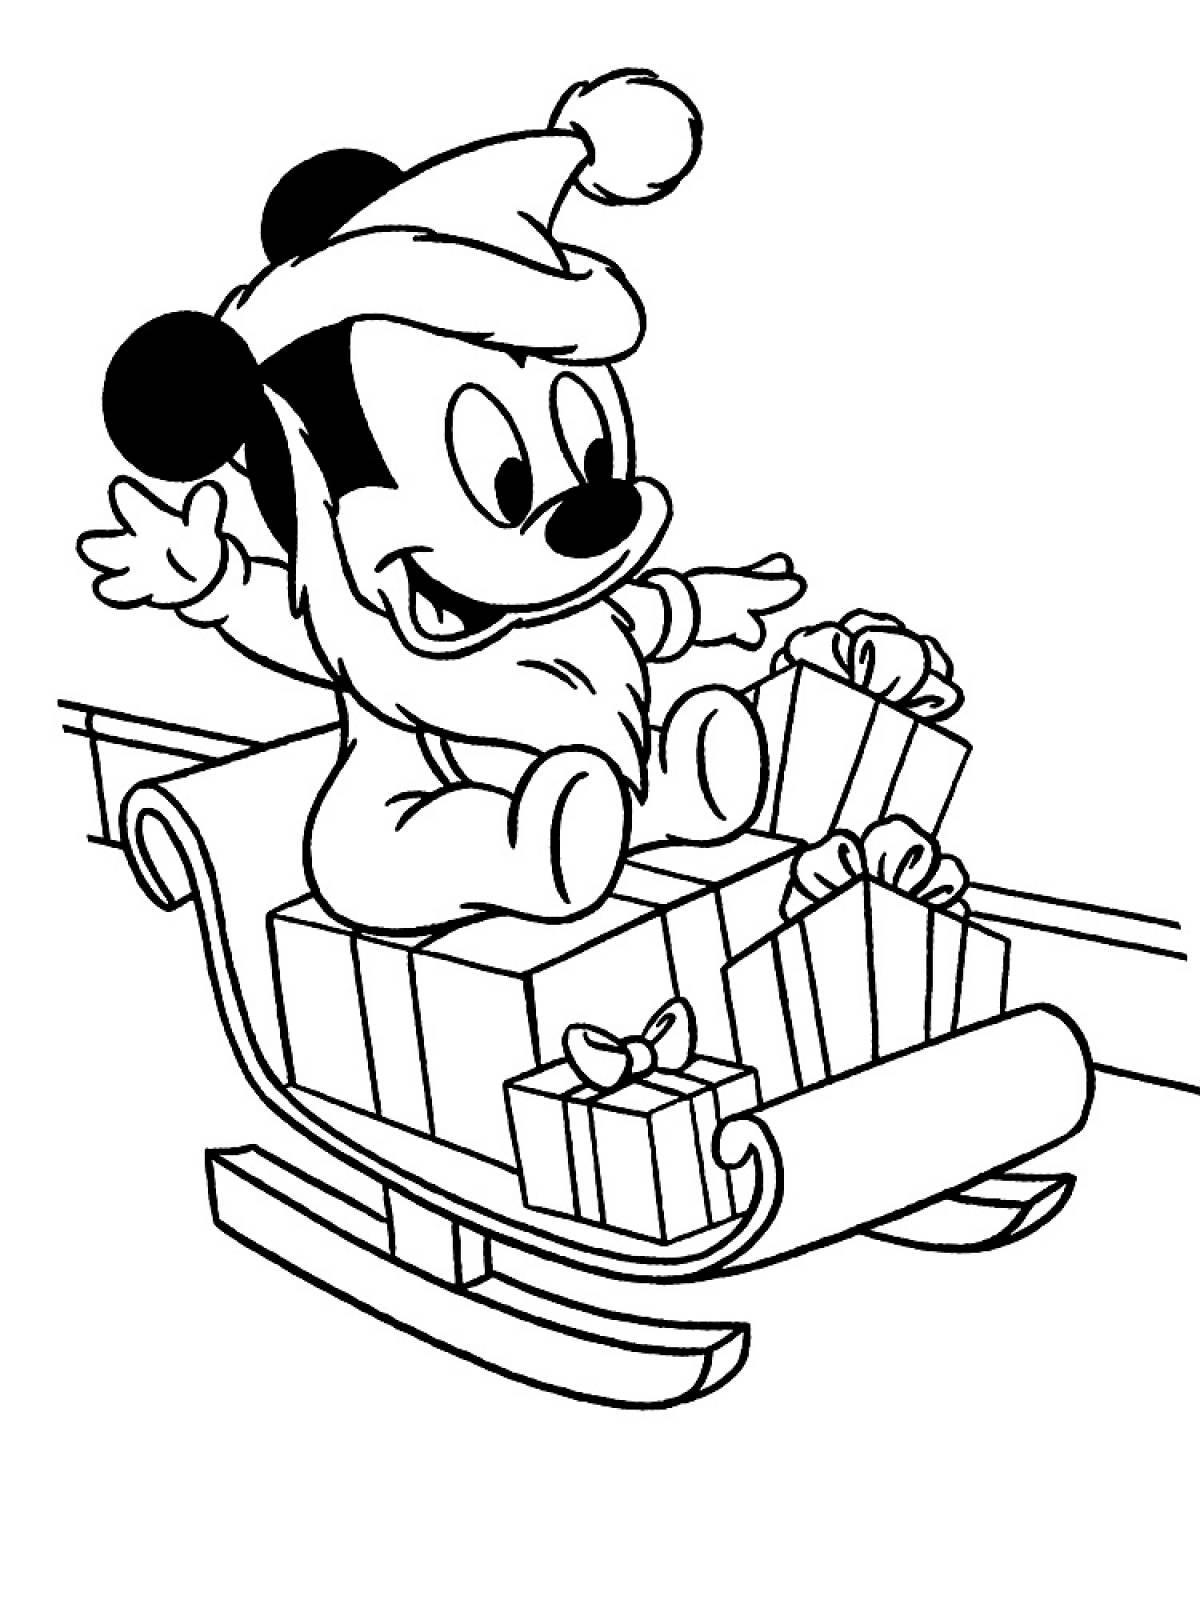 Mickey on a sled